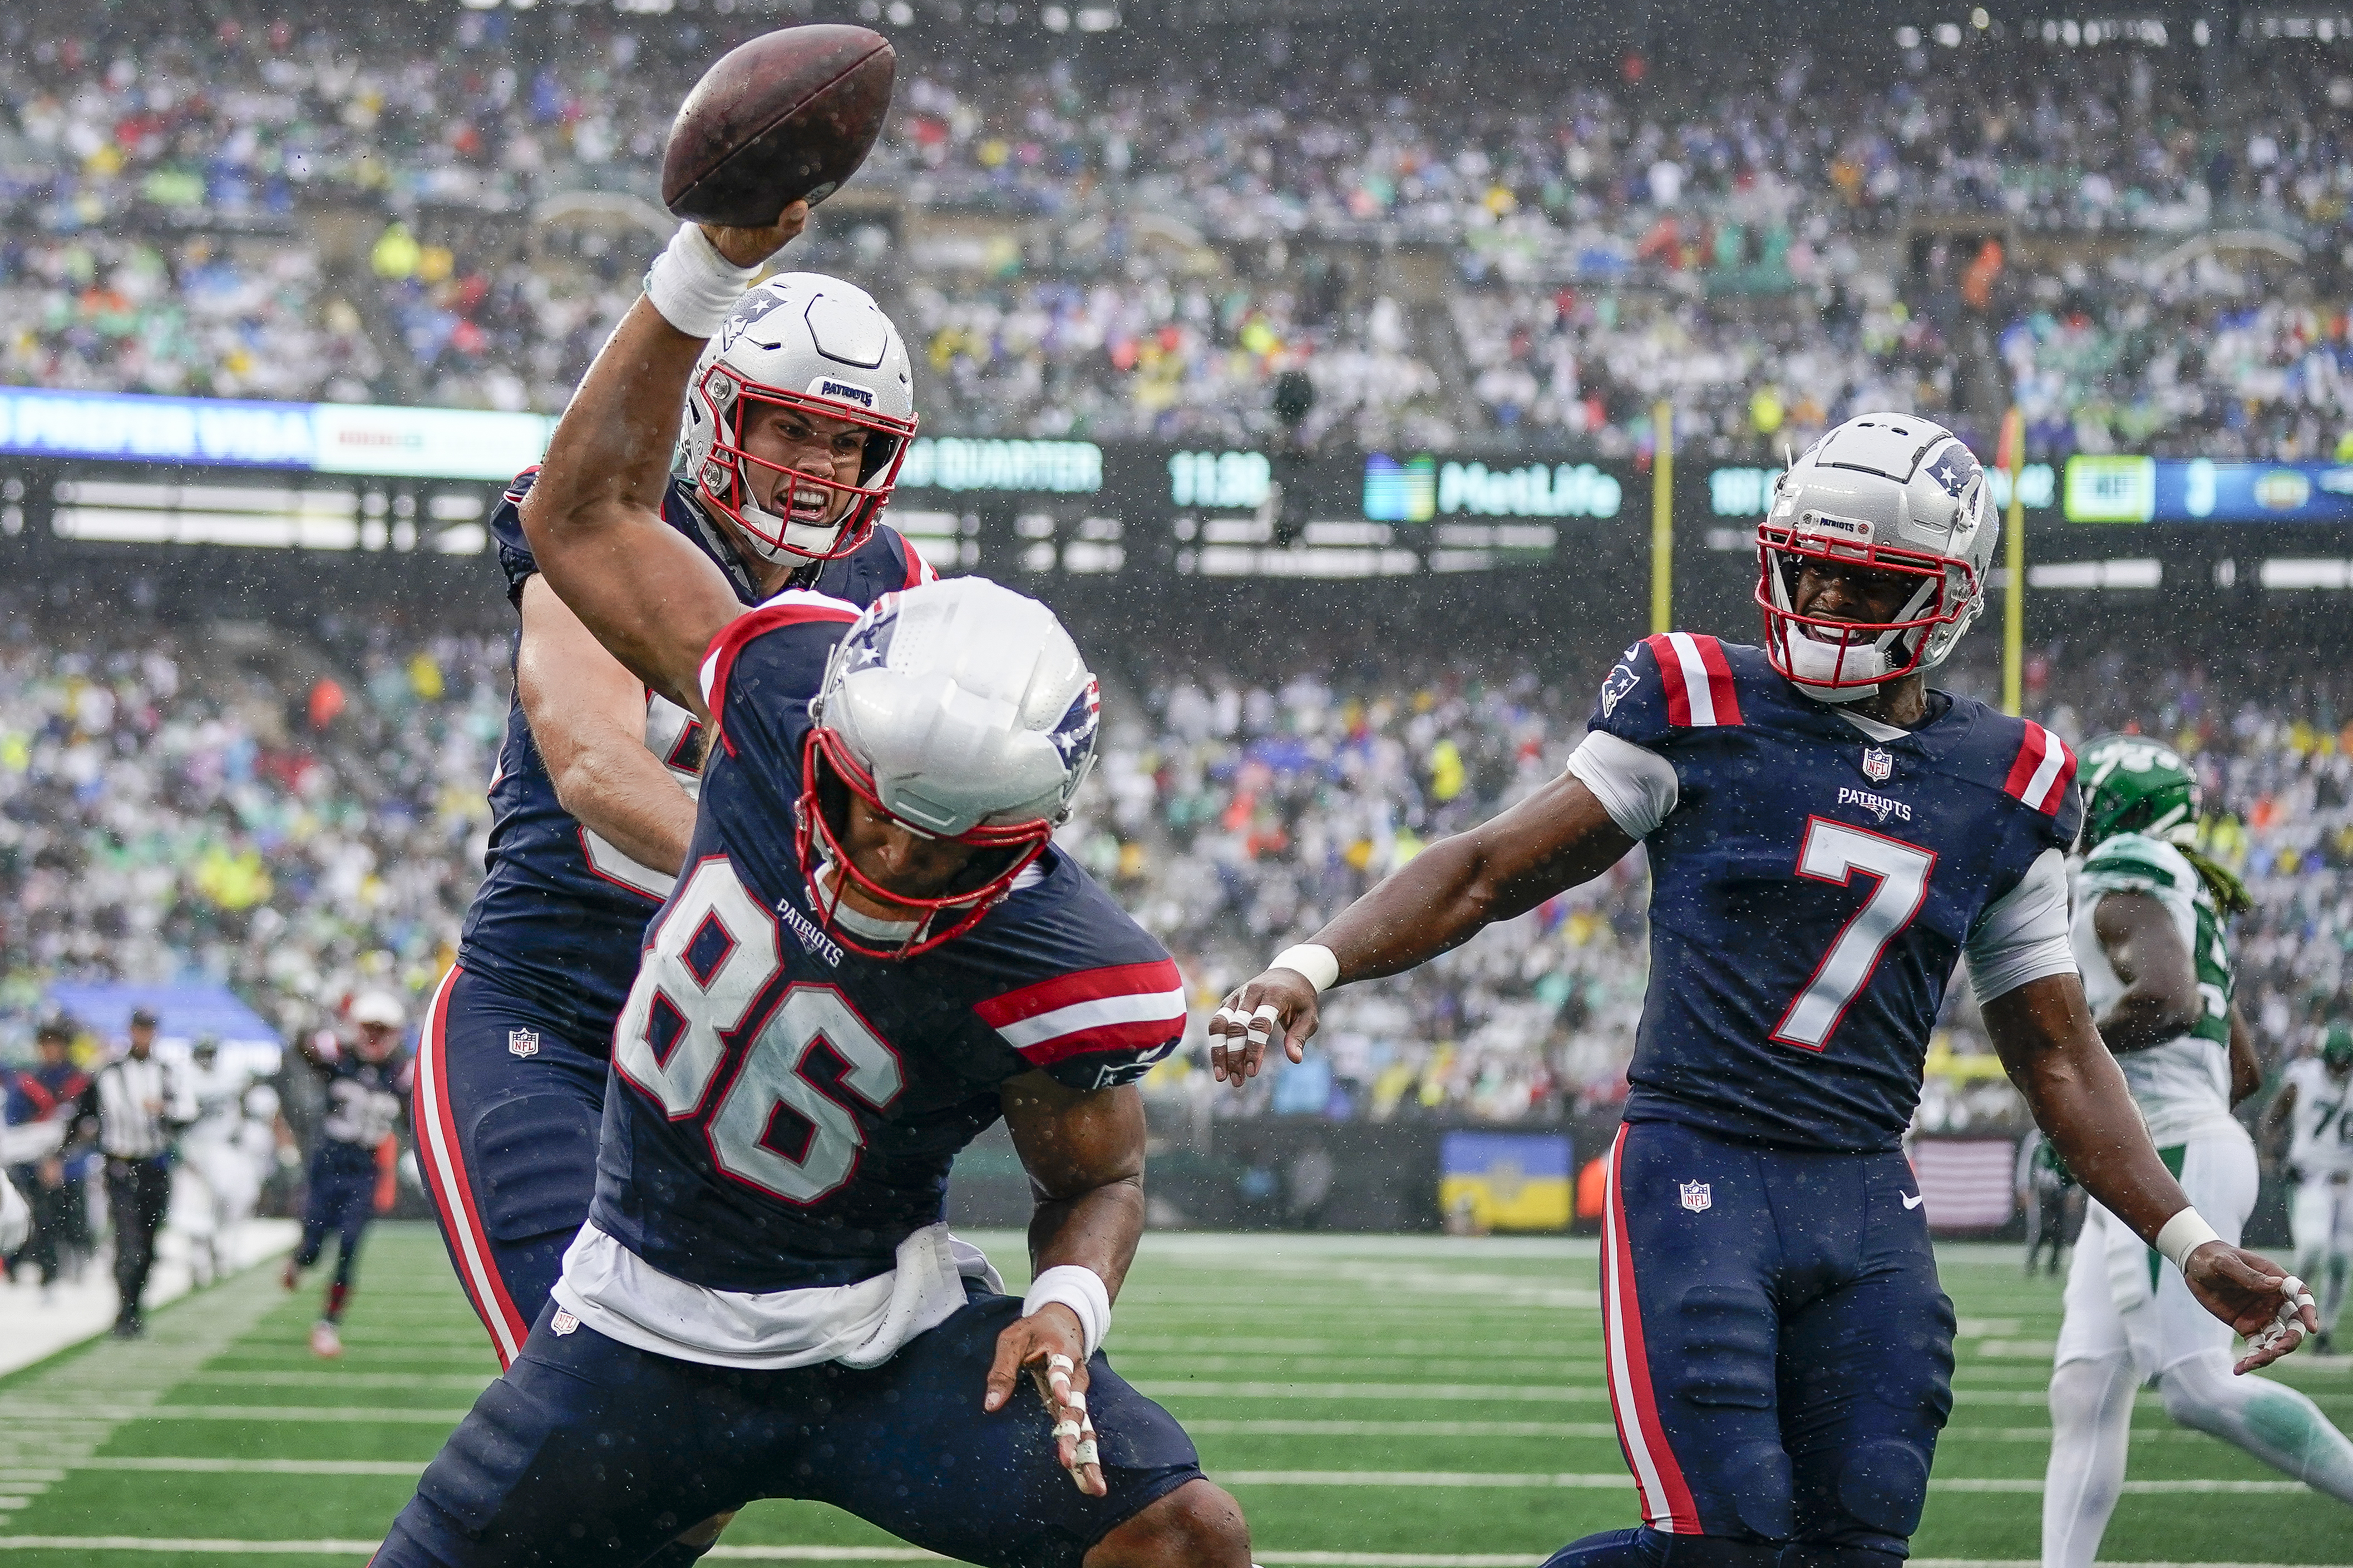 Patriots defeat Jets 15-10 for first win of the season